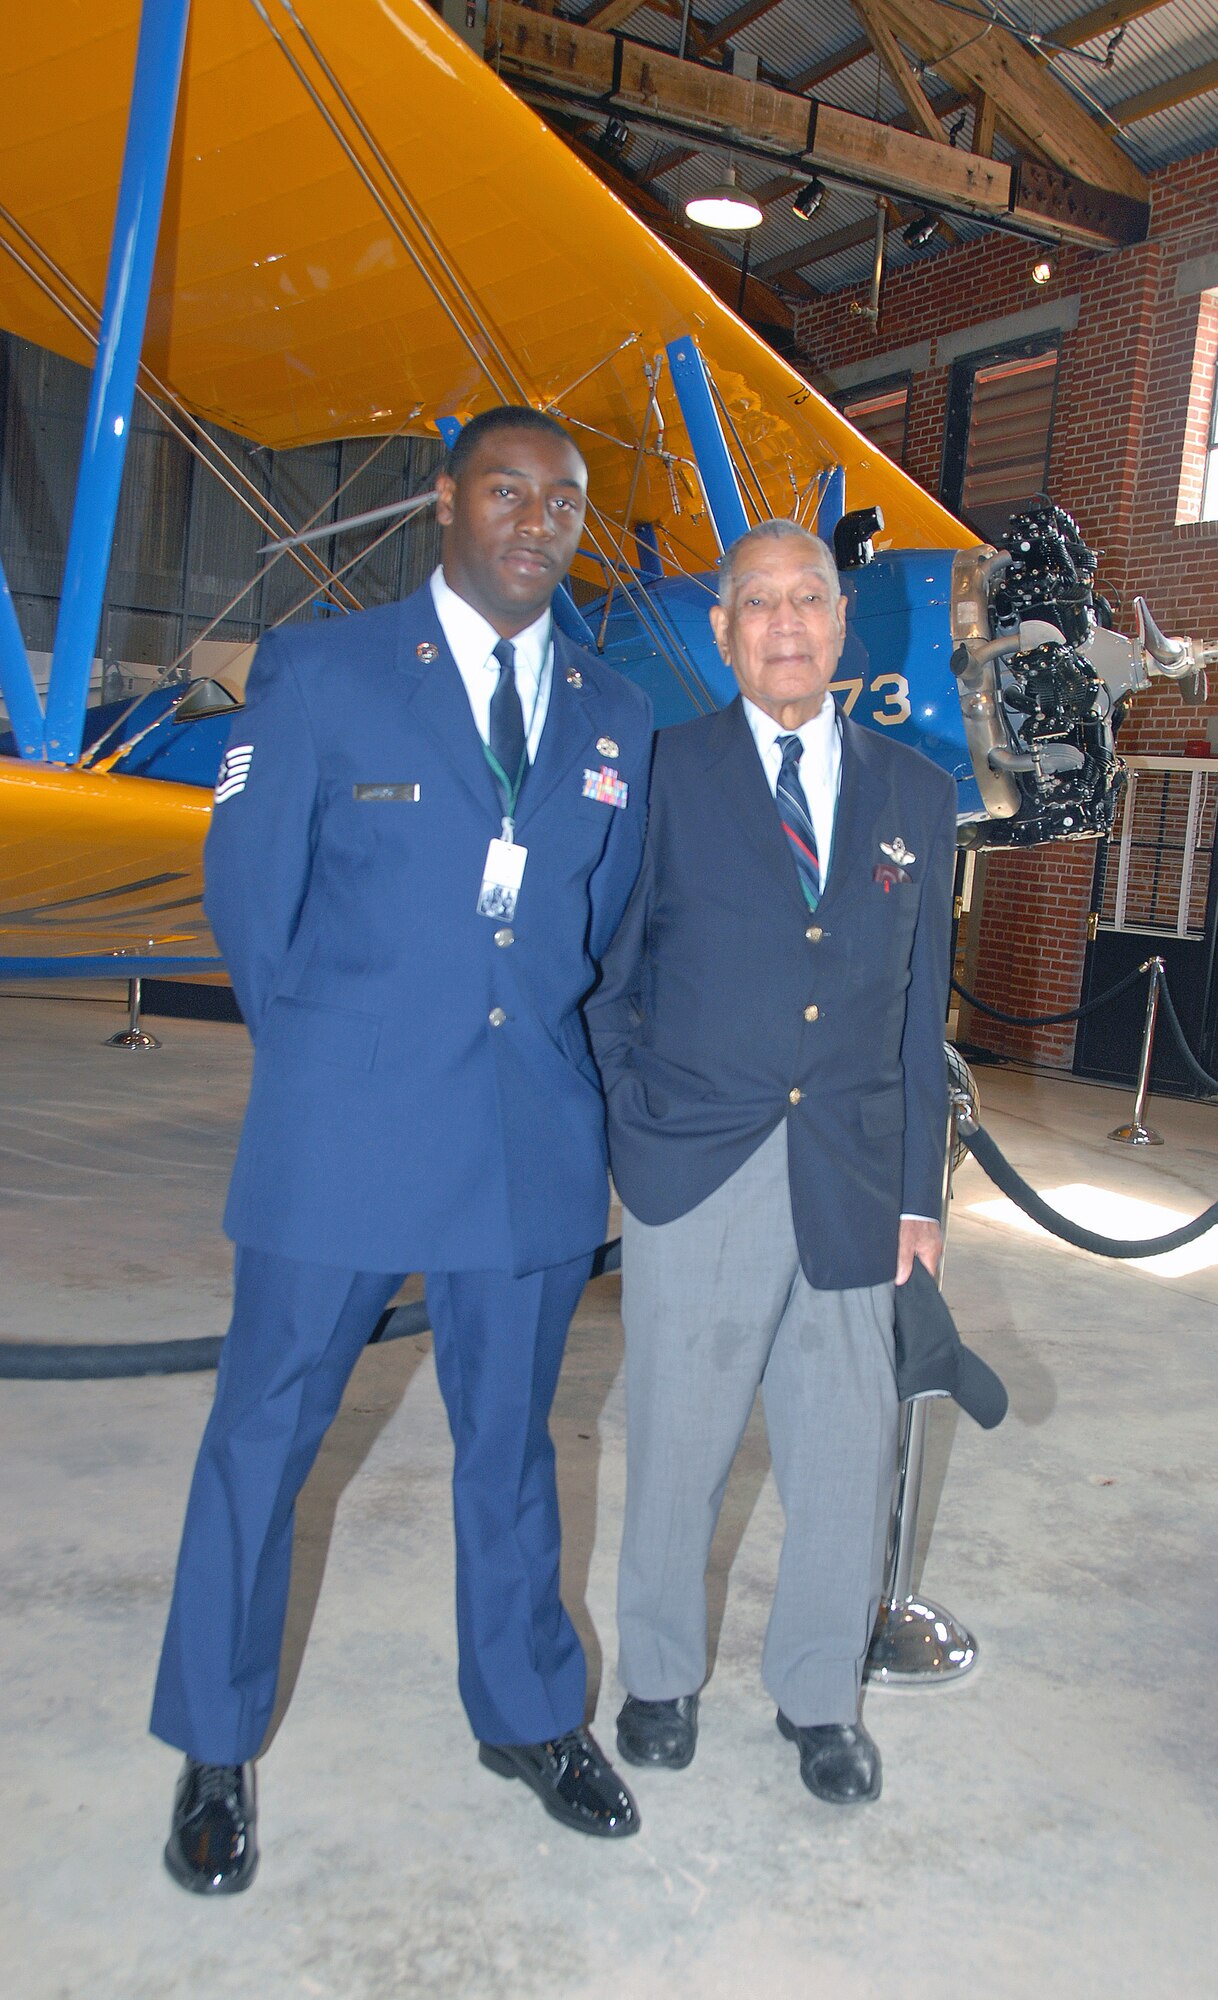 Tech. Sgt. D'Wayne Guice poses for a keepsake photo with retired Lt. Col. Lee "Buddy" Archer in front of the Stearman PT-17 trainer exhibit on display at the Tuskegee Airmen National Historic Site. Colonel Archer registered five confirmed enemy kills to become the only Tuskegee Airman "Ace" during WWII. Sergeant Guice is a member of the 908th Airlift Wing at nearby Maxwell AFB, Ala. (U.S. Air Force Photo by Lt. Col. Jerry Lobb)         